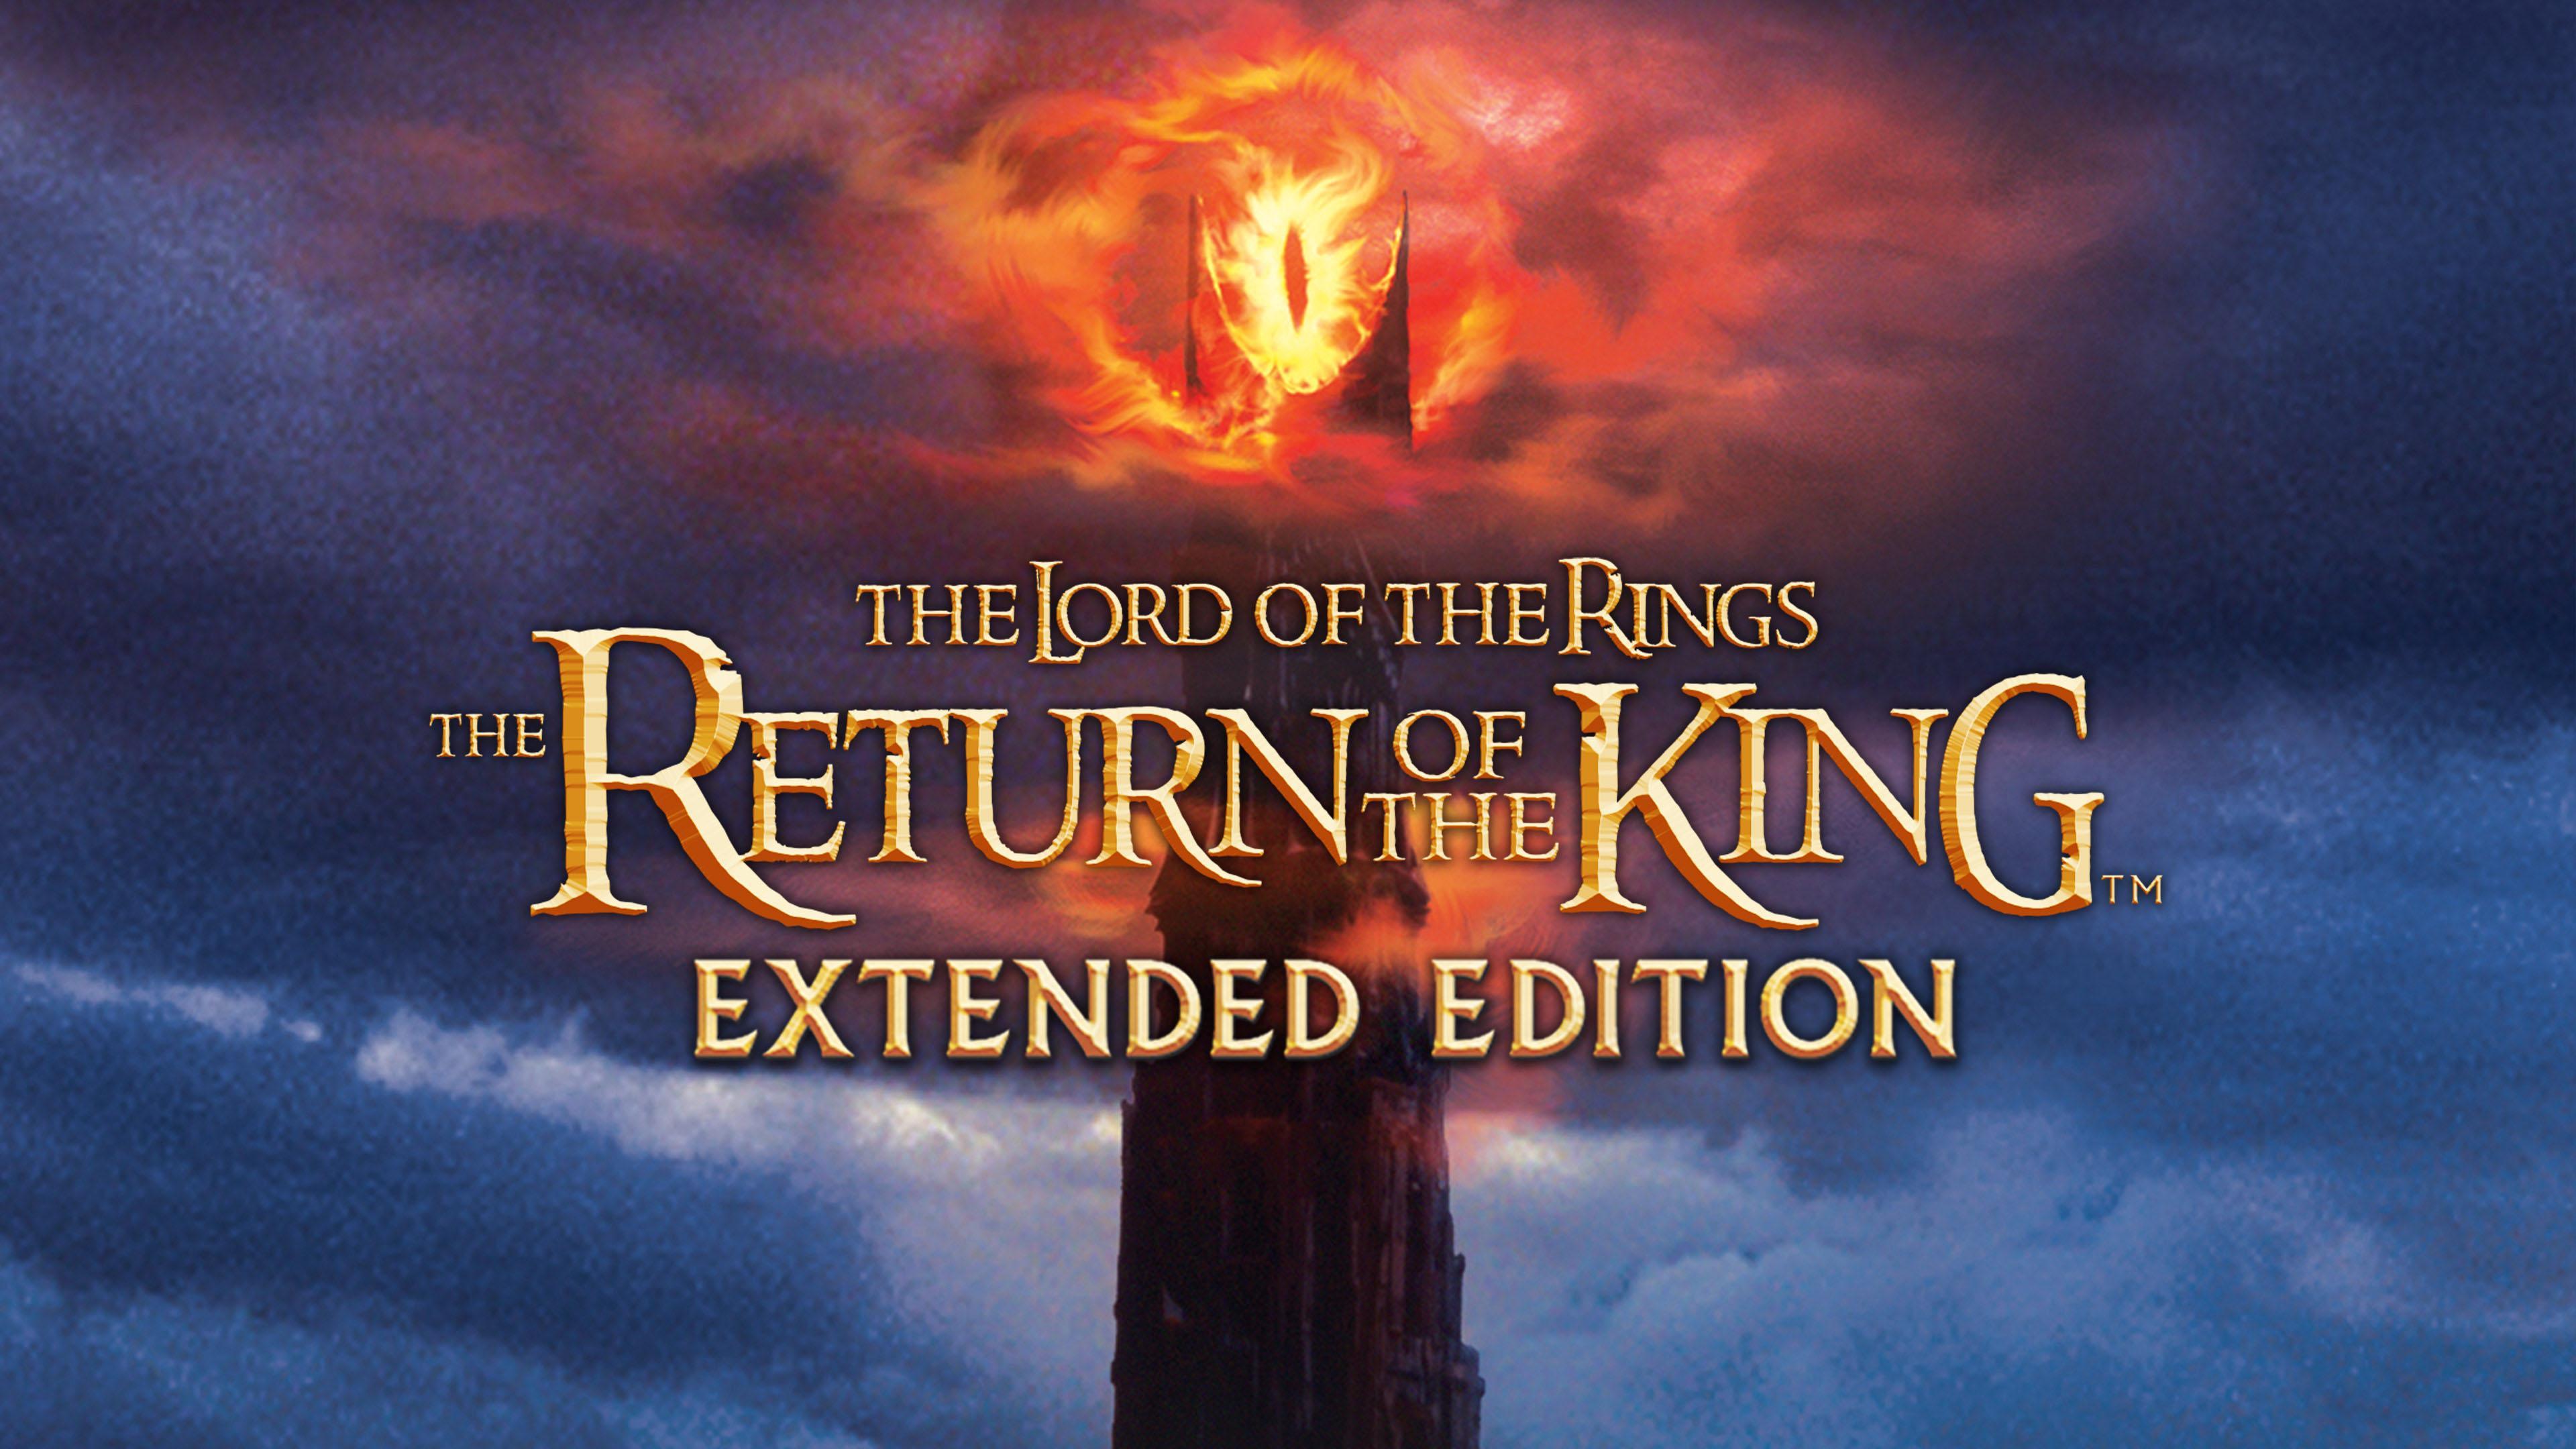 The Lord of the Rings: The Return of the King, Suite from: Full